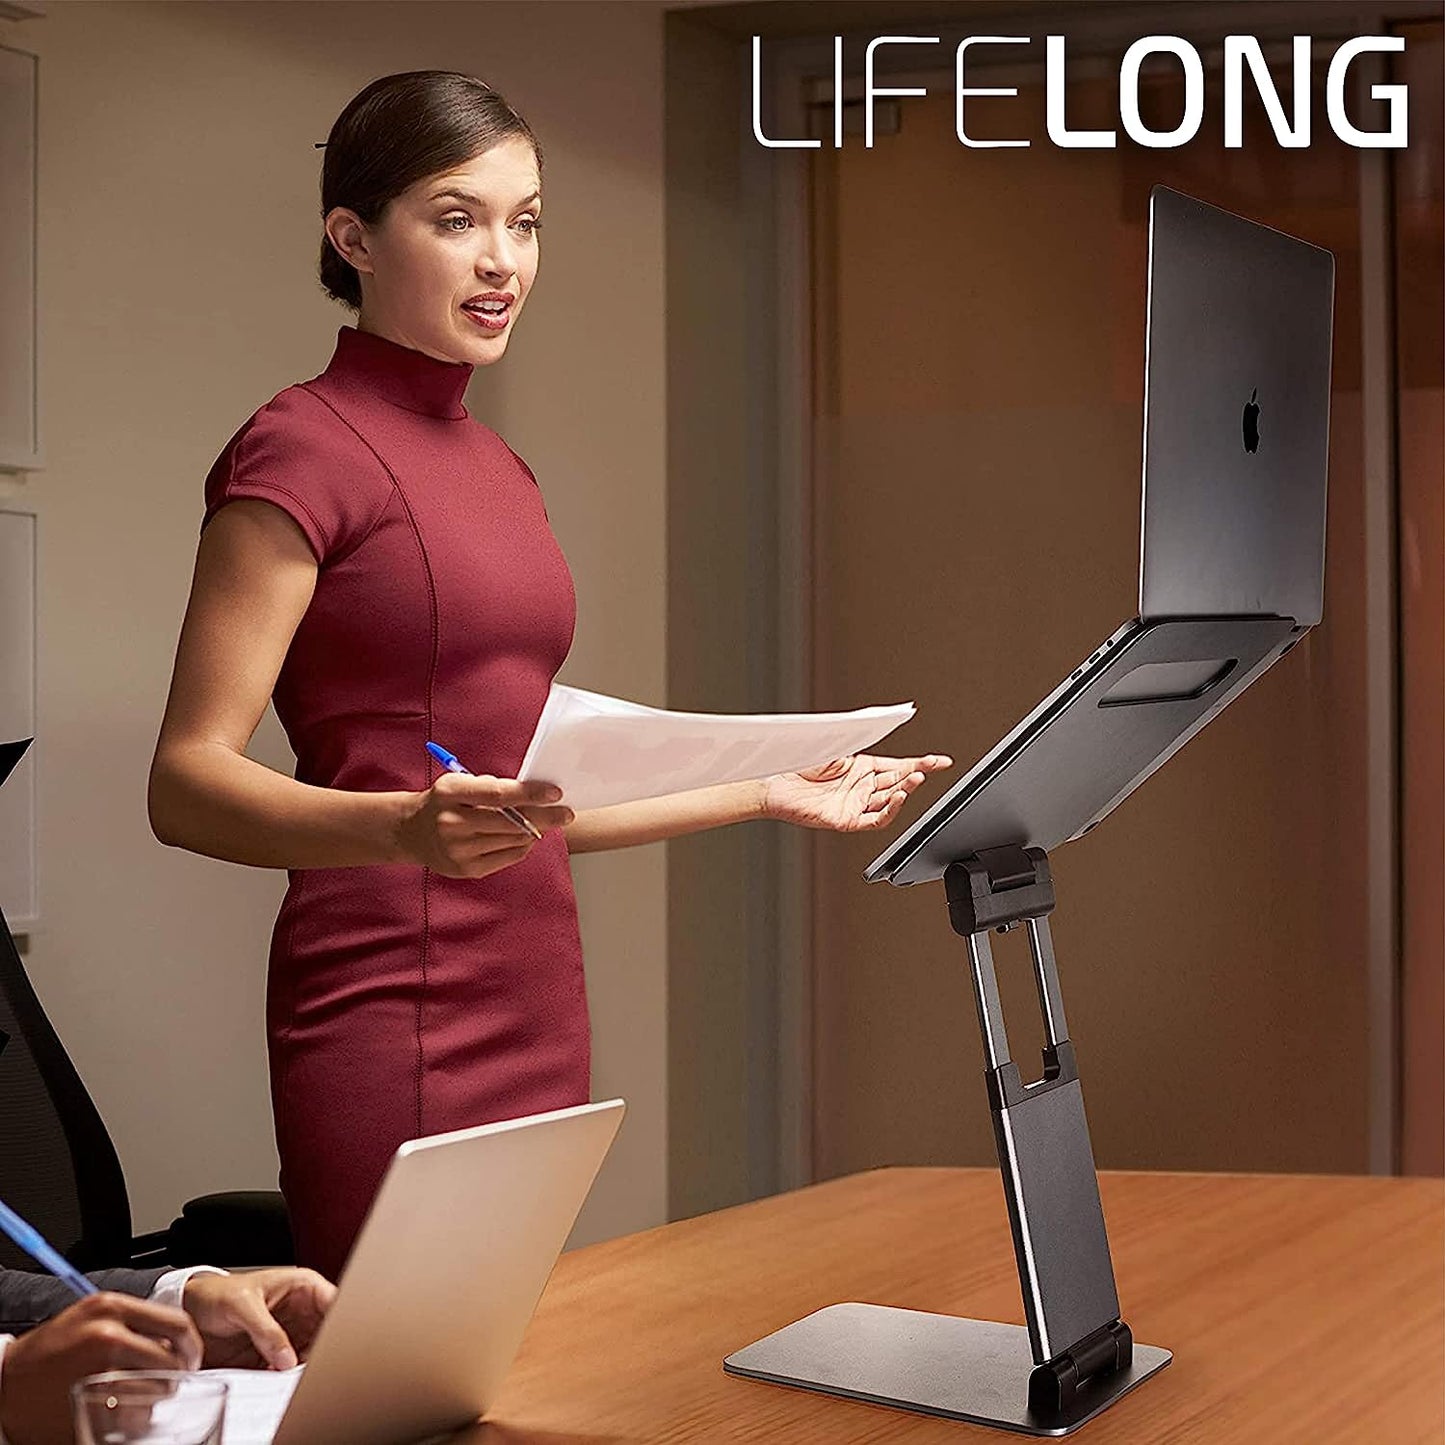 Lifelong Ergonomic Laptop Stand For Desk, Adjustable Height Up To 20"